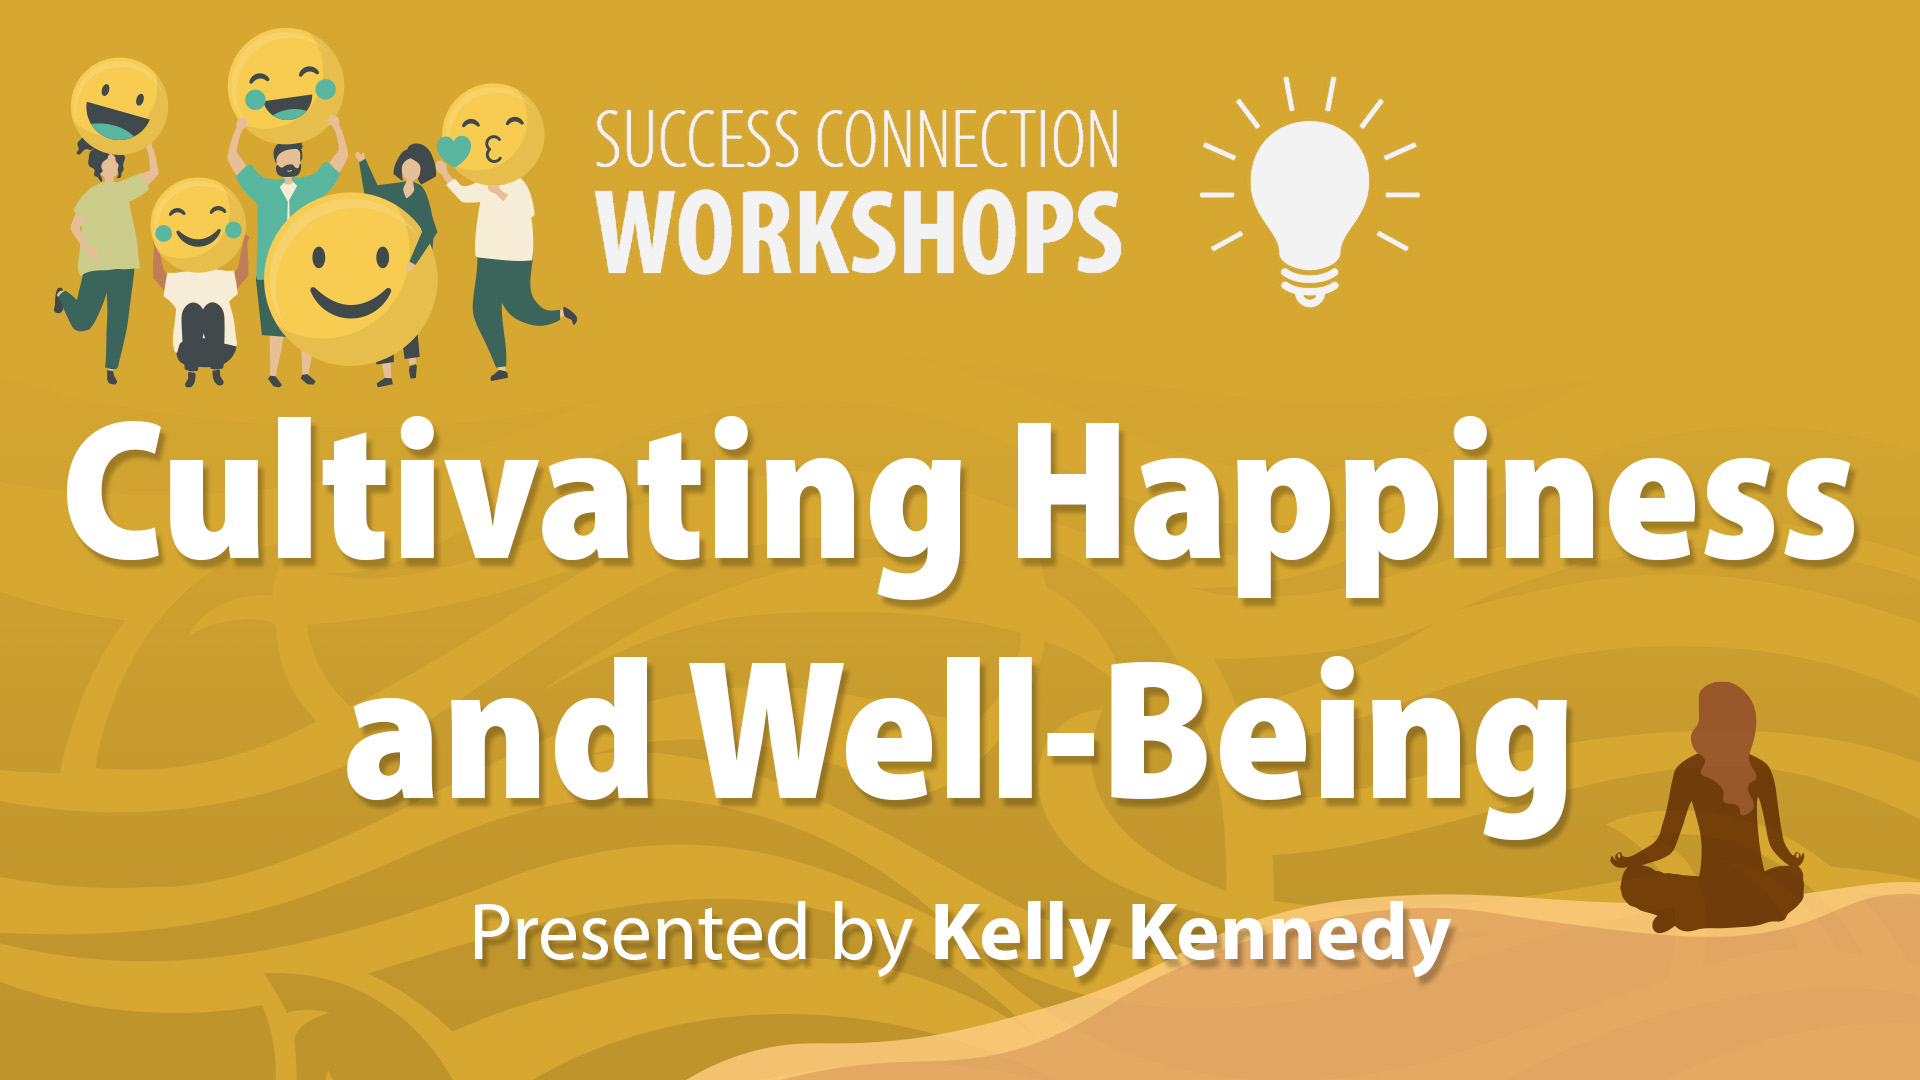 Success Connection Workshops Cultivating Happiness and Well-Being